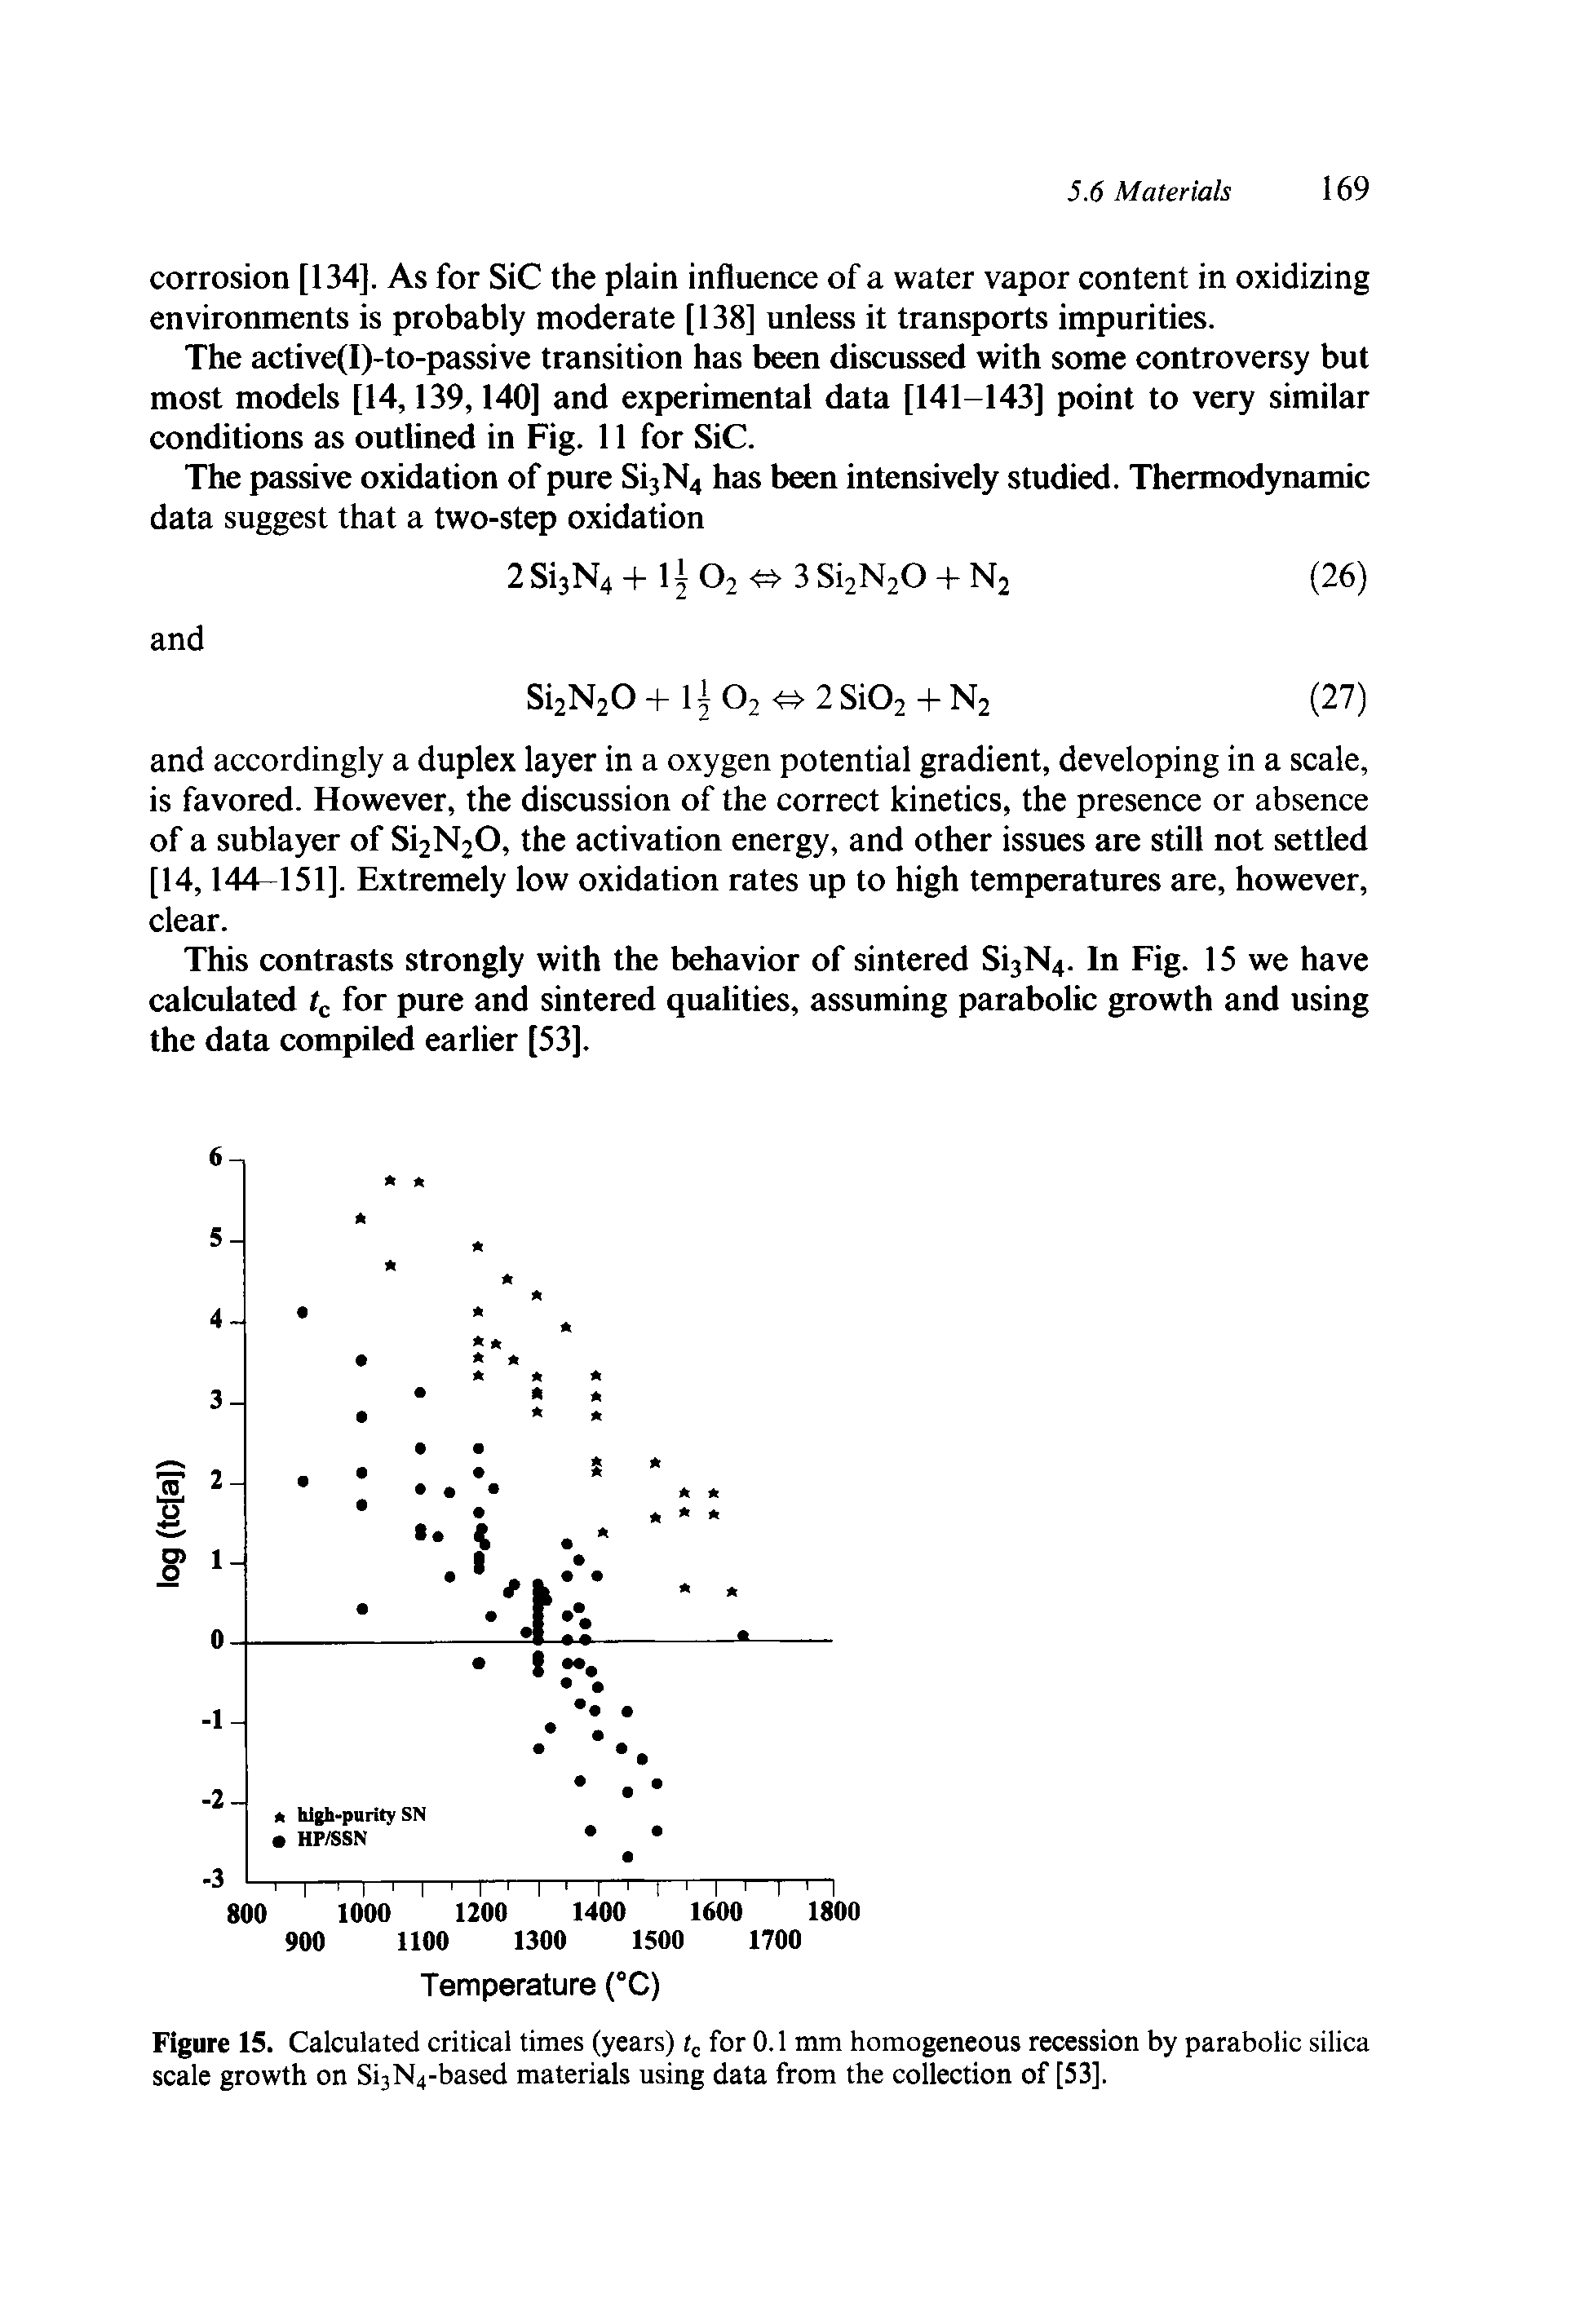 Figure 15. Calculated critical times (years) for 0.1 mm homogeneous recession by parabolic silica scale growth on Si3N4-based materials using data from the collection of [53],...